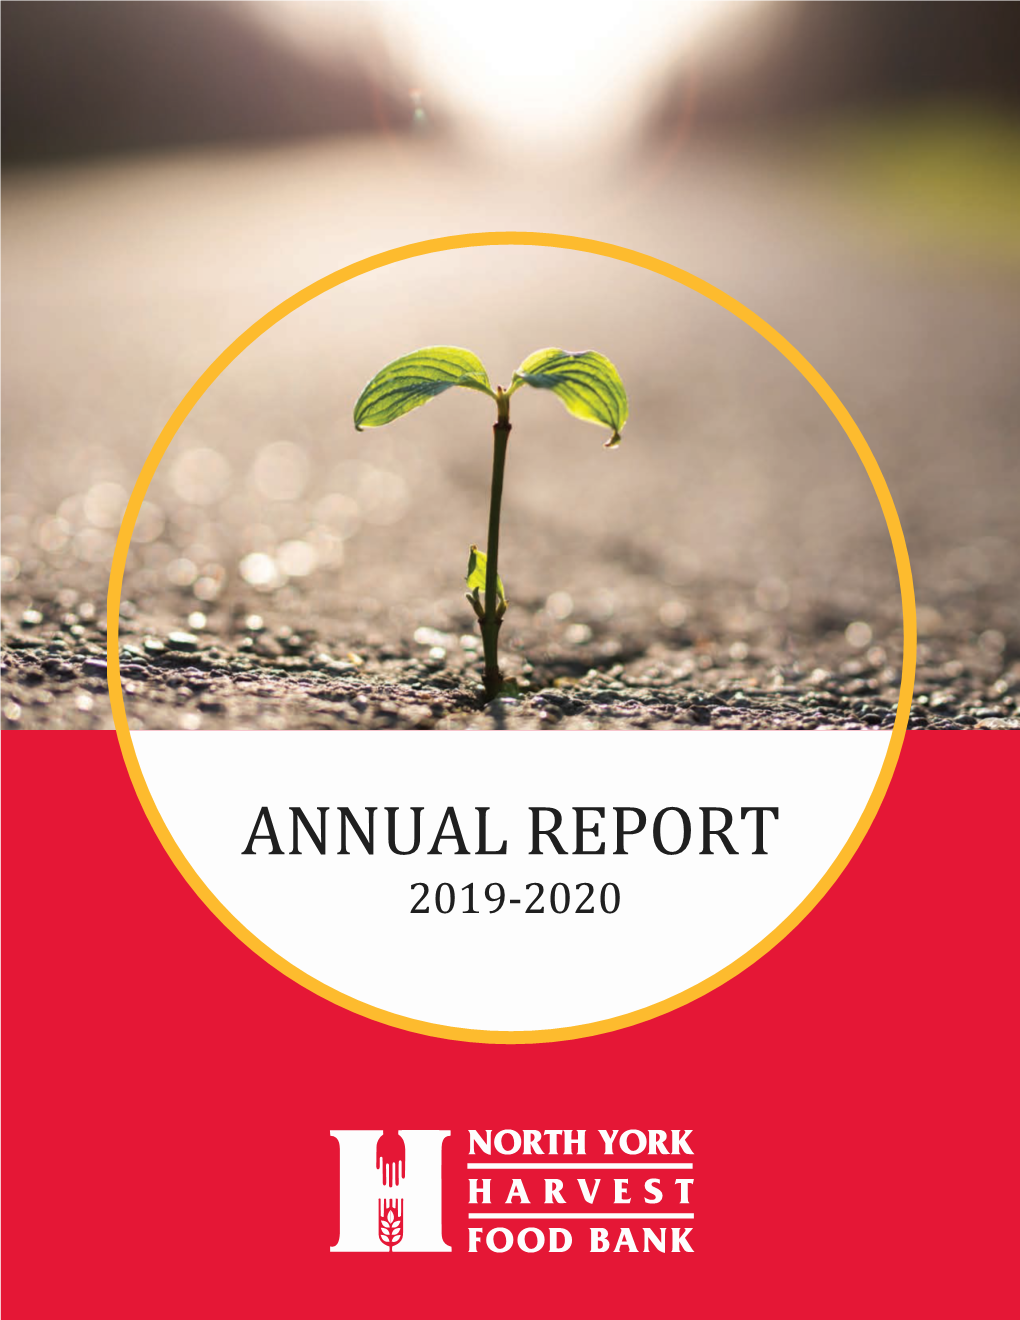 ANNUAL REPORT 2019-2020 North York Harvest Food Bank | Annual Report 2019-20 Page 1